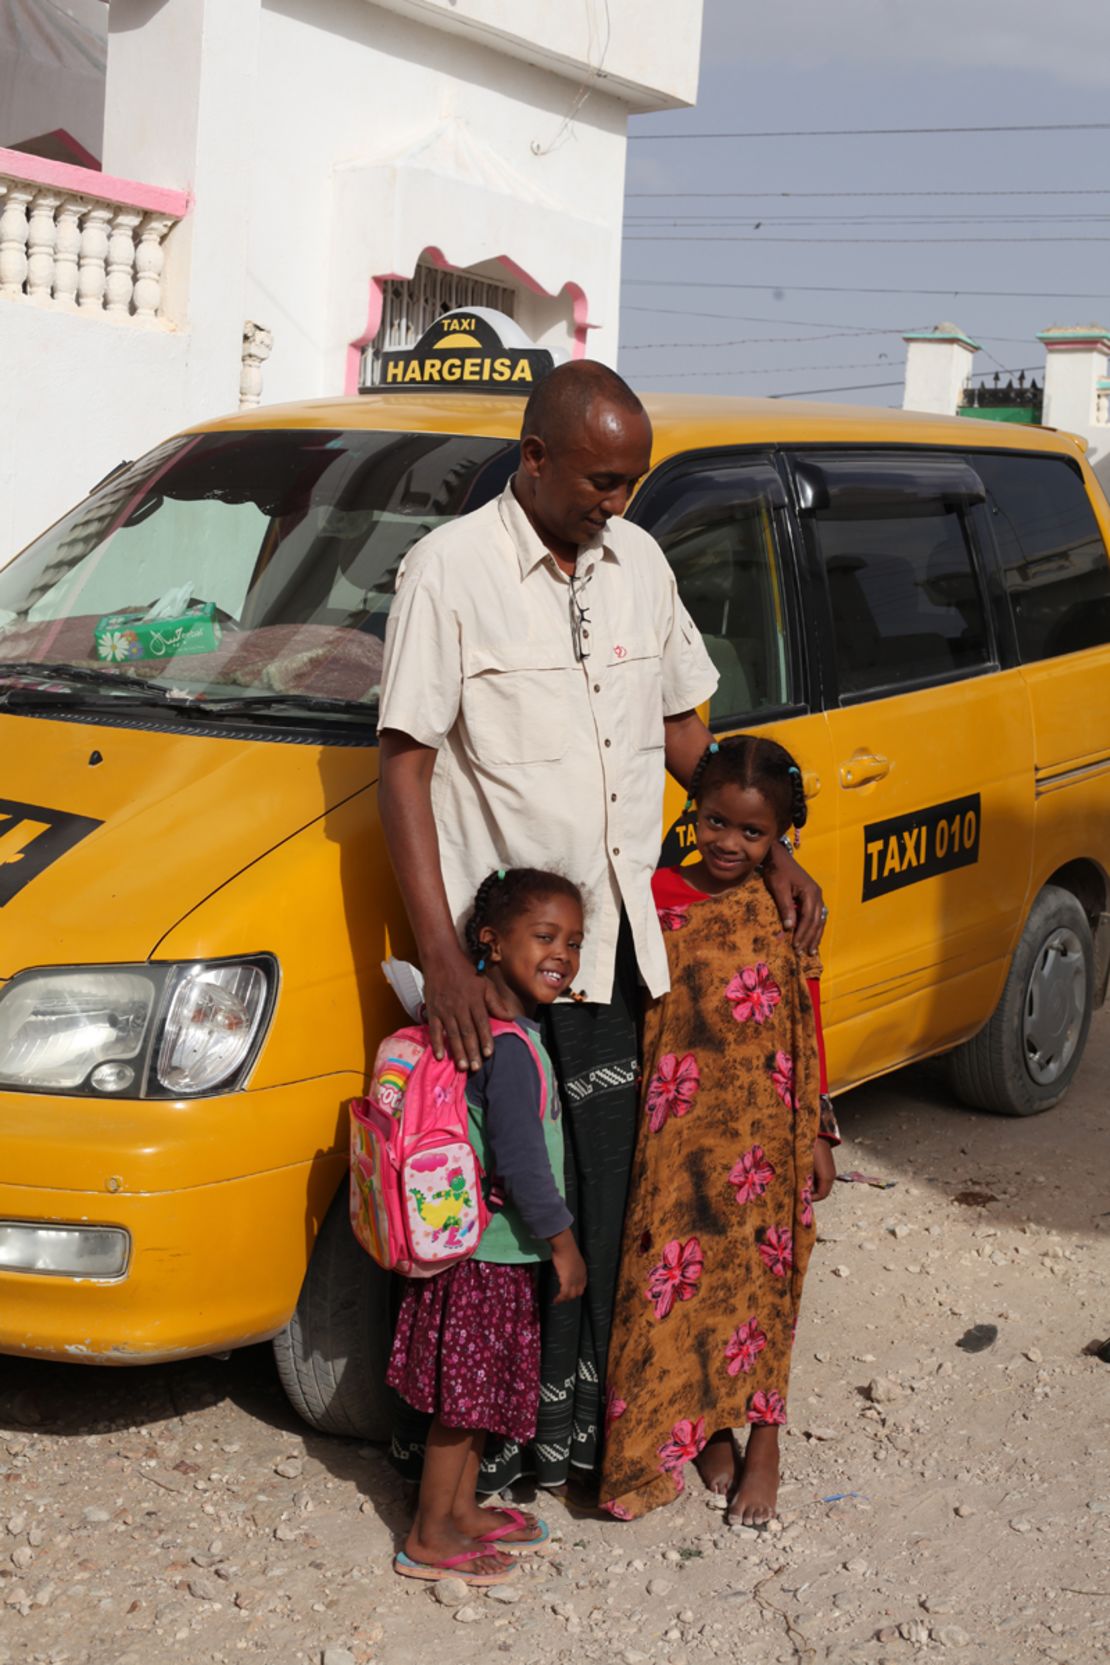 Hargeisa Taxi takes measures to ensure a safe ride.